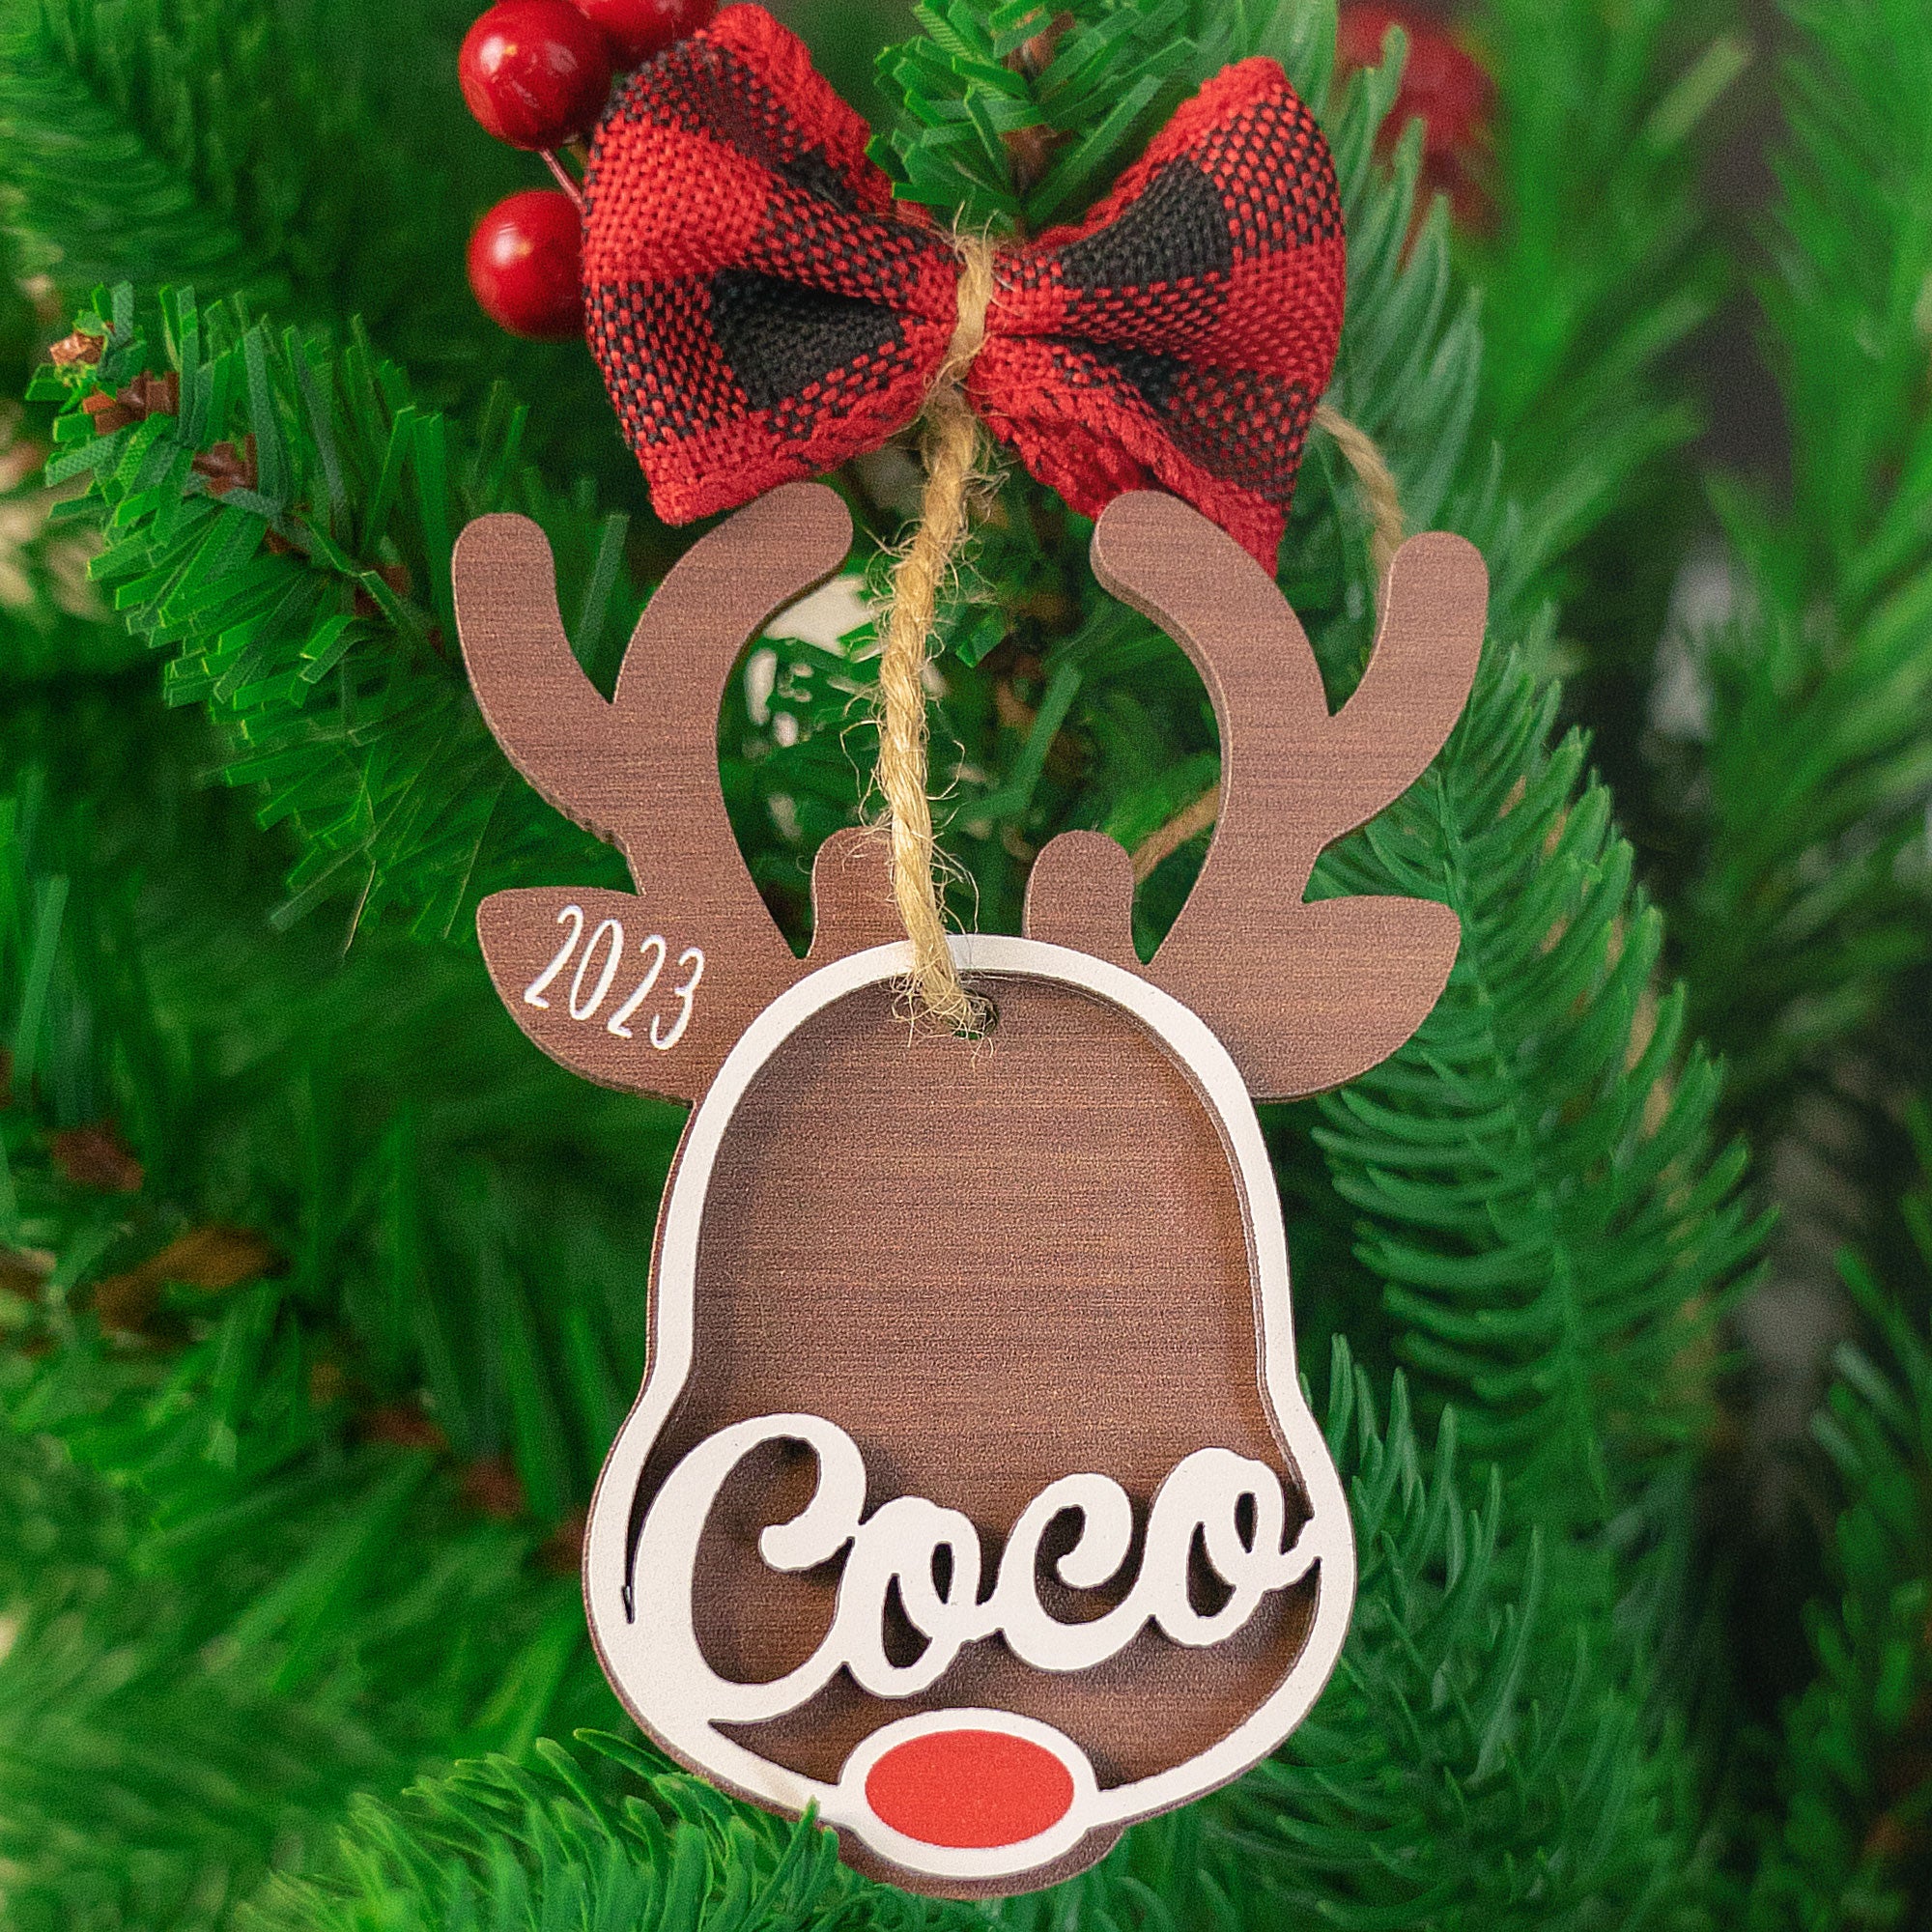 Personalized reindeer 2023 christmas ornament, wooden ornaments, Custo